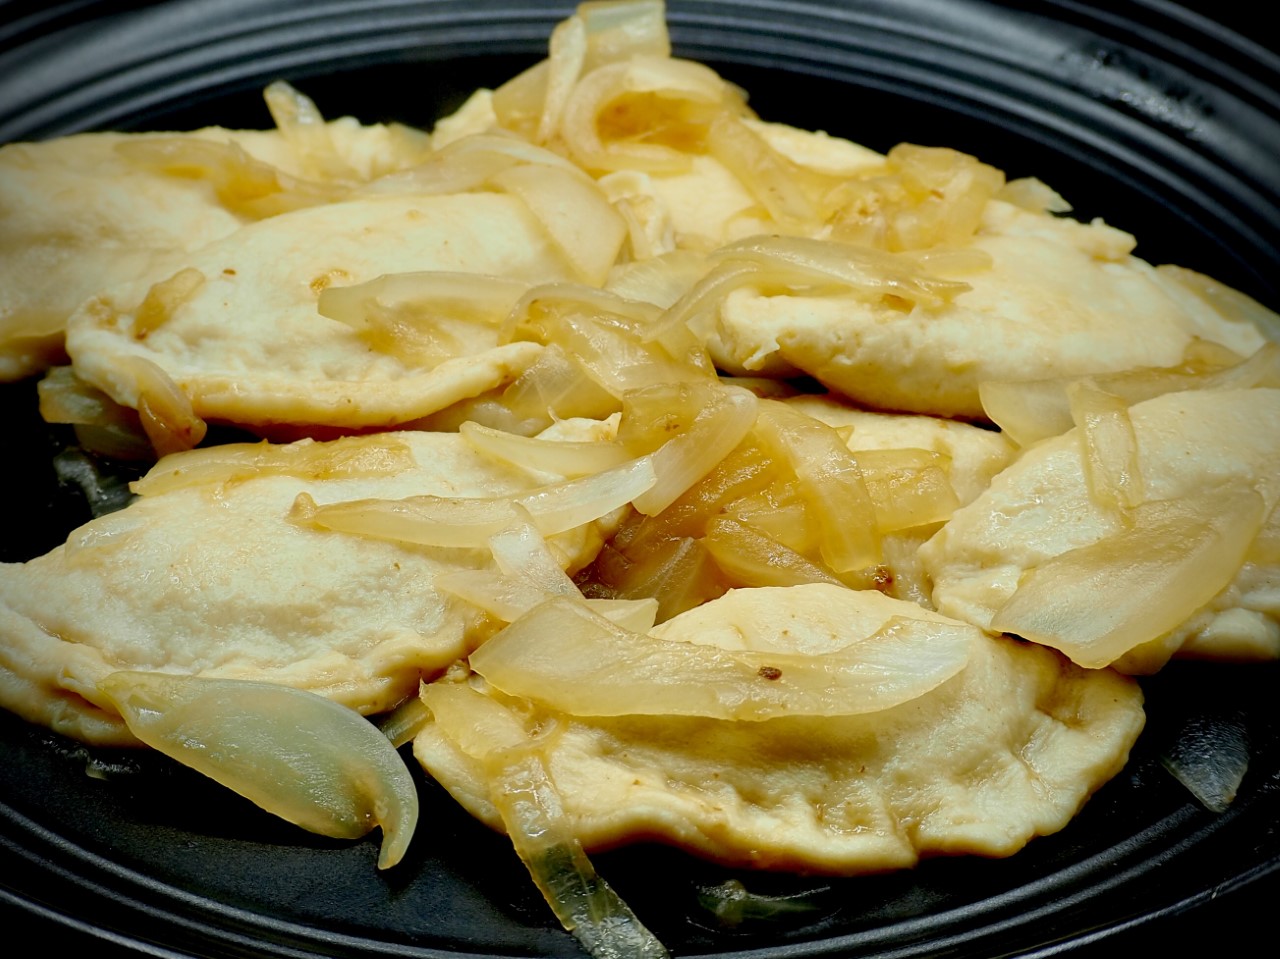 Homemade Potato and Cheddar Cheese Pierogies with Caramelized Onions